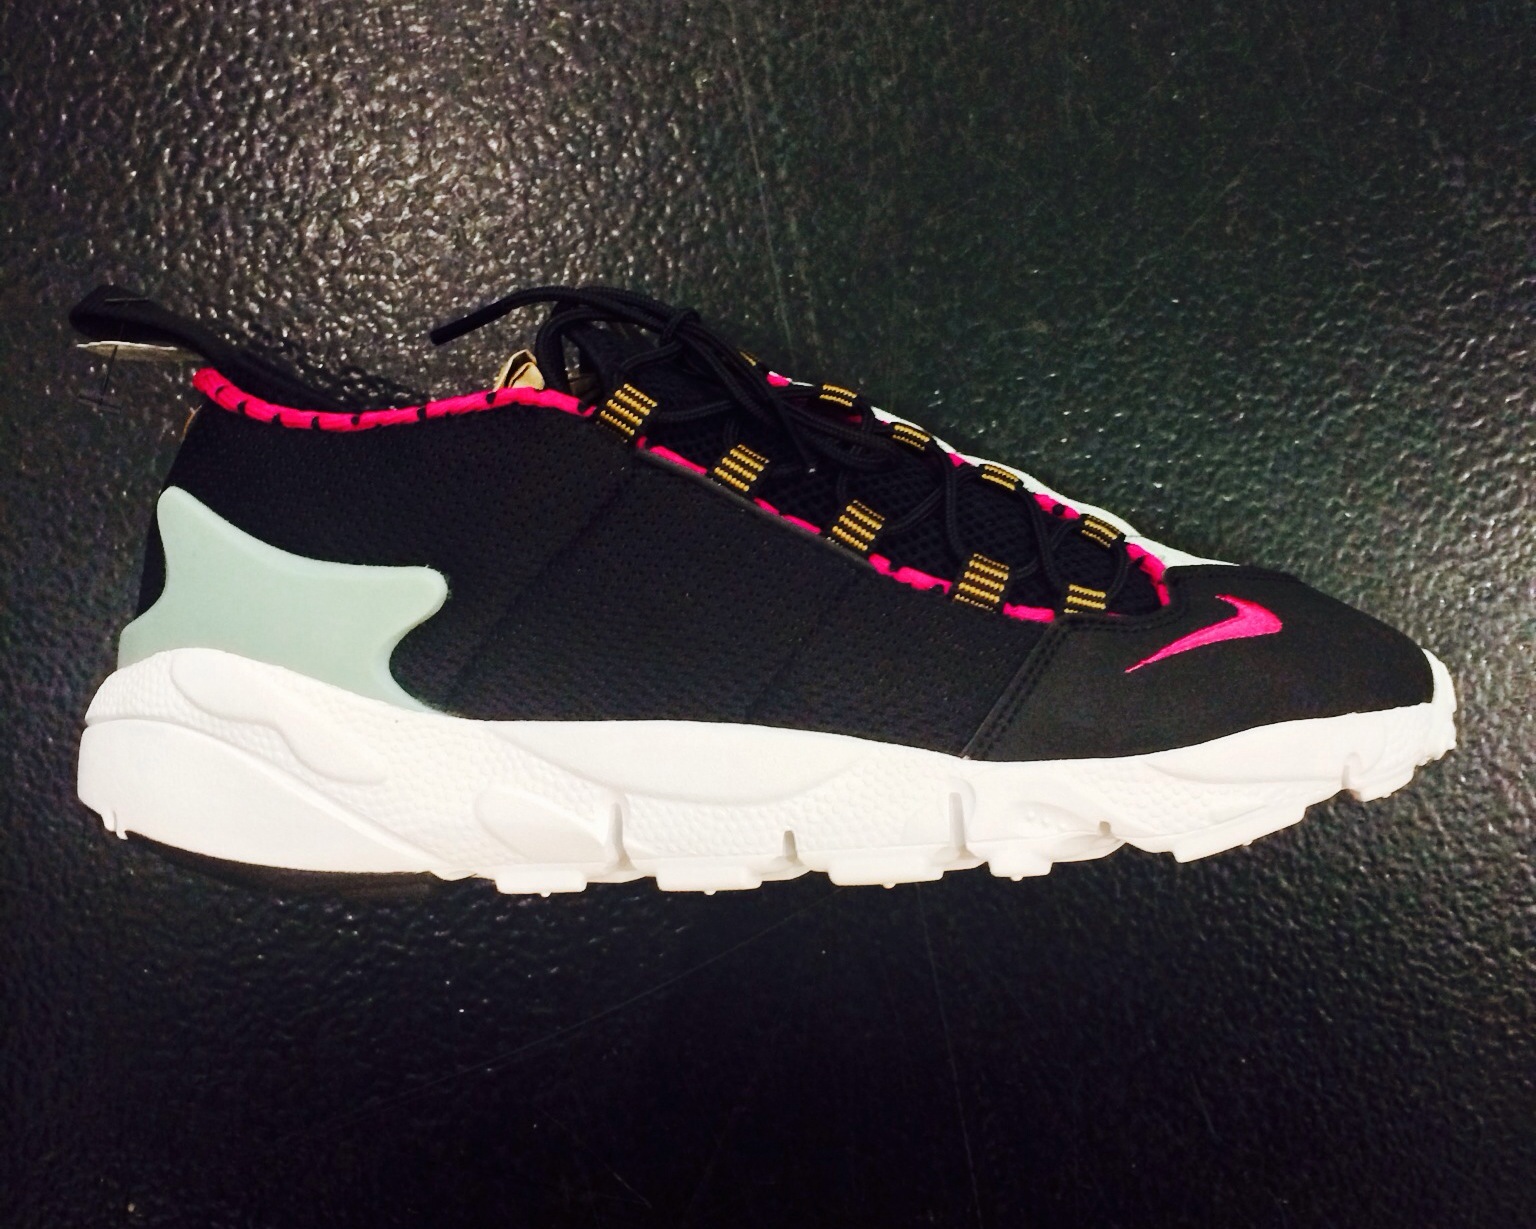 Nike Air Footscape “Solar Red”